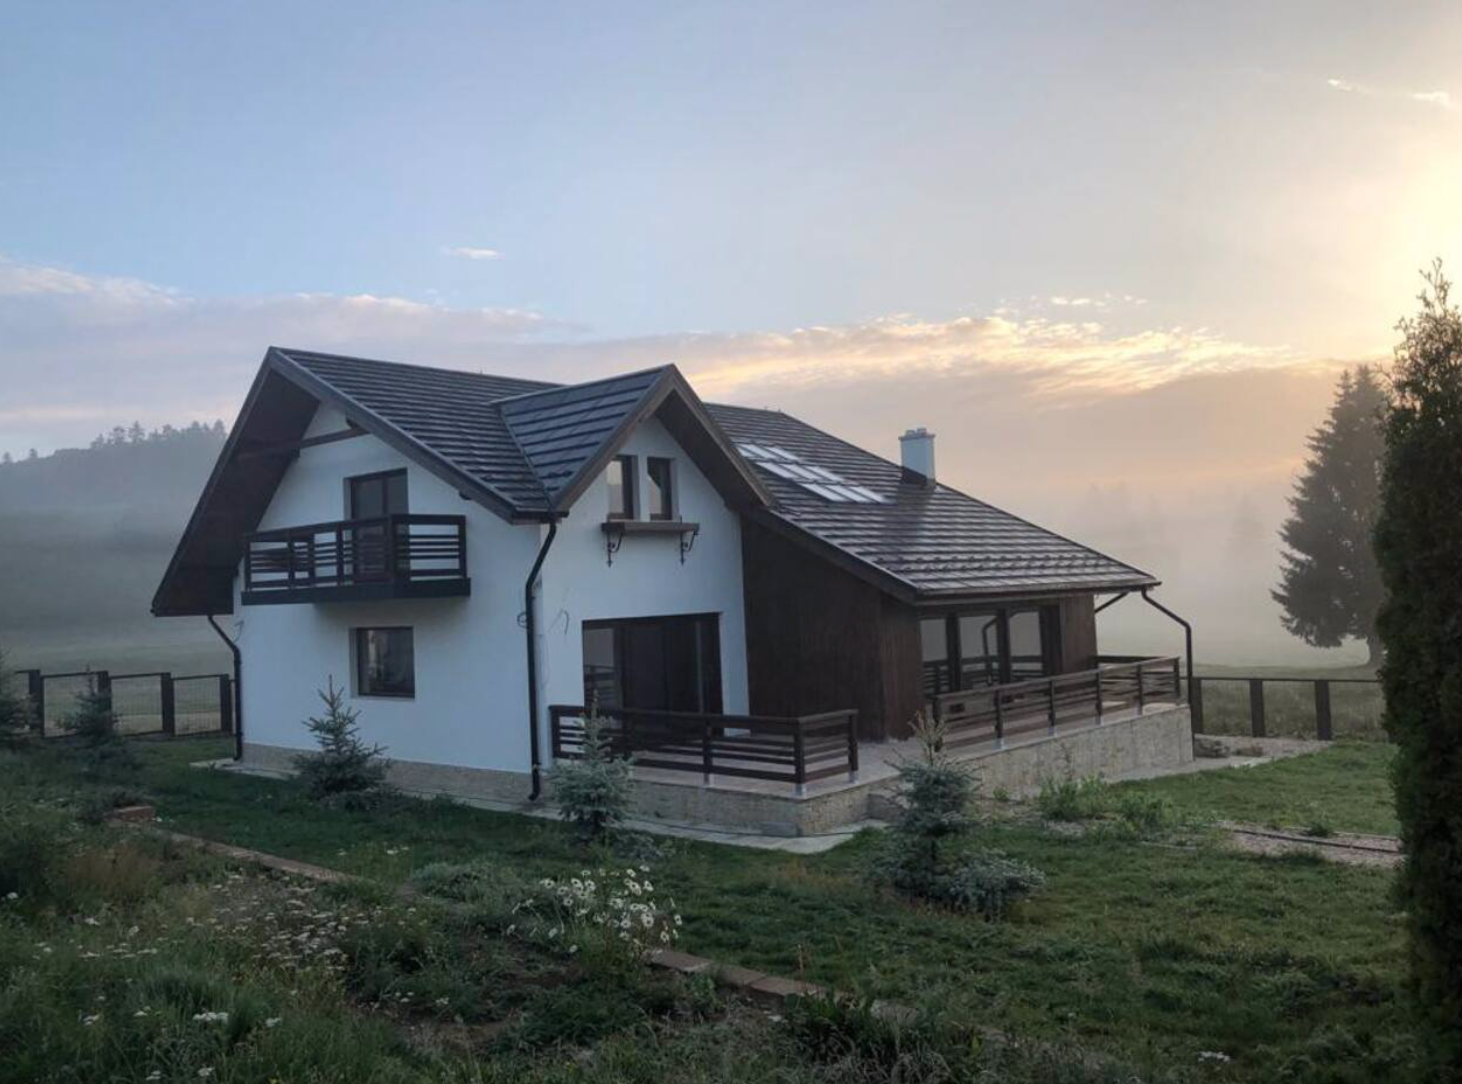 Red Deer Lodge, a luxury chalet on Airbnb in the Carpathian Mountains of Transylvania, Romania